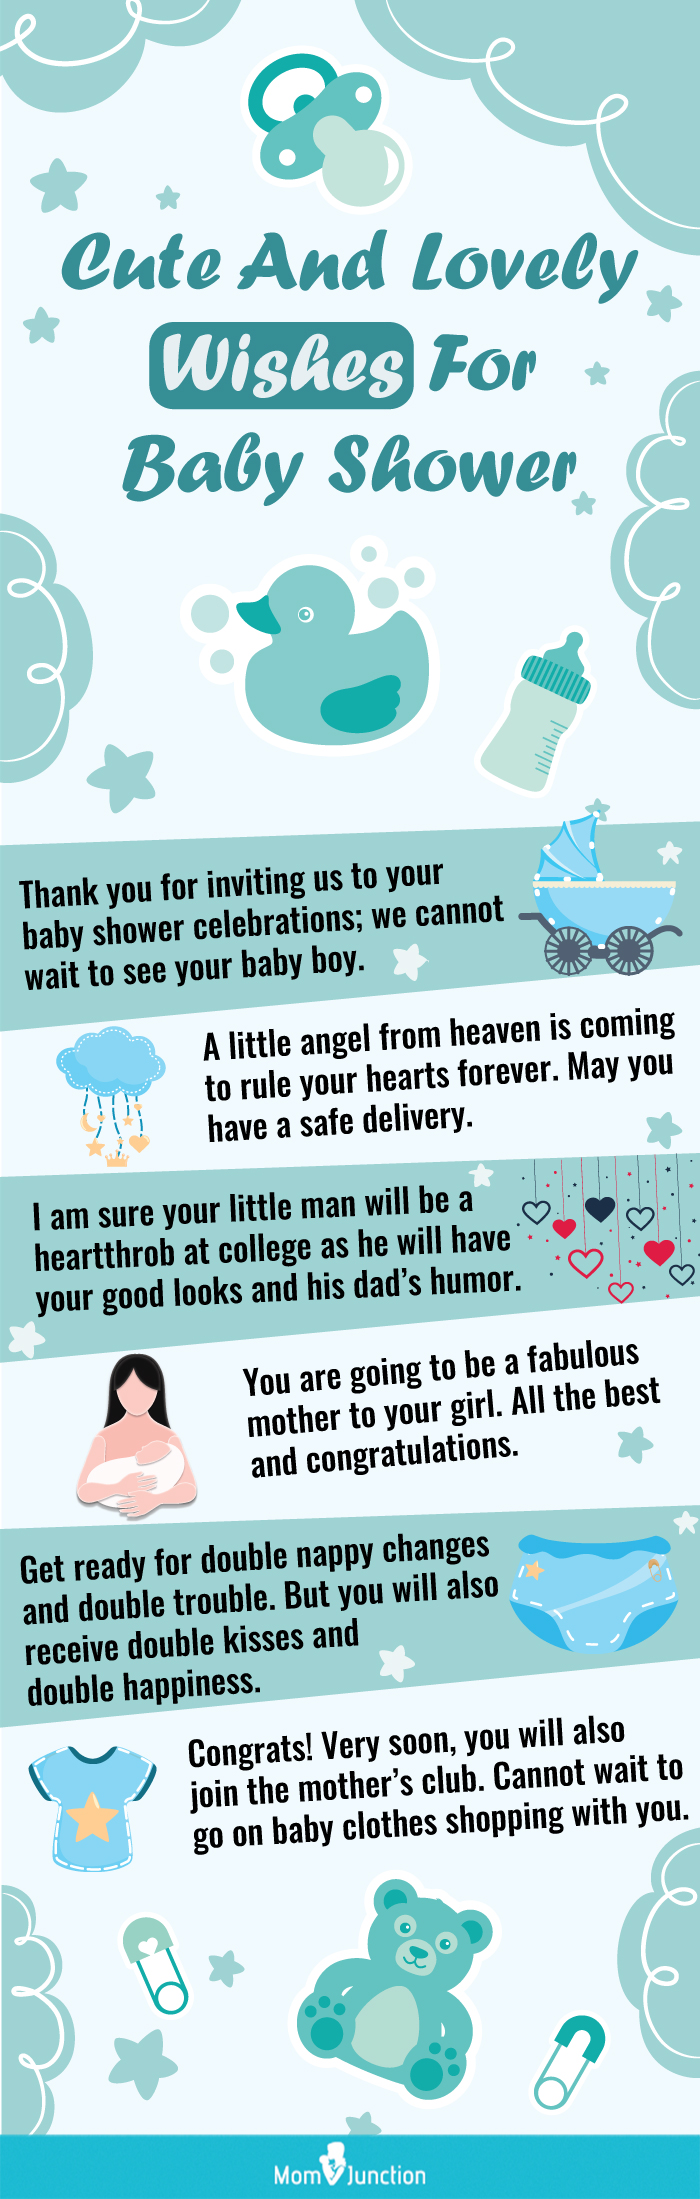 Baby Shower Messages And Wishes To Write In Your Card